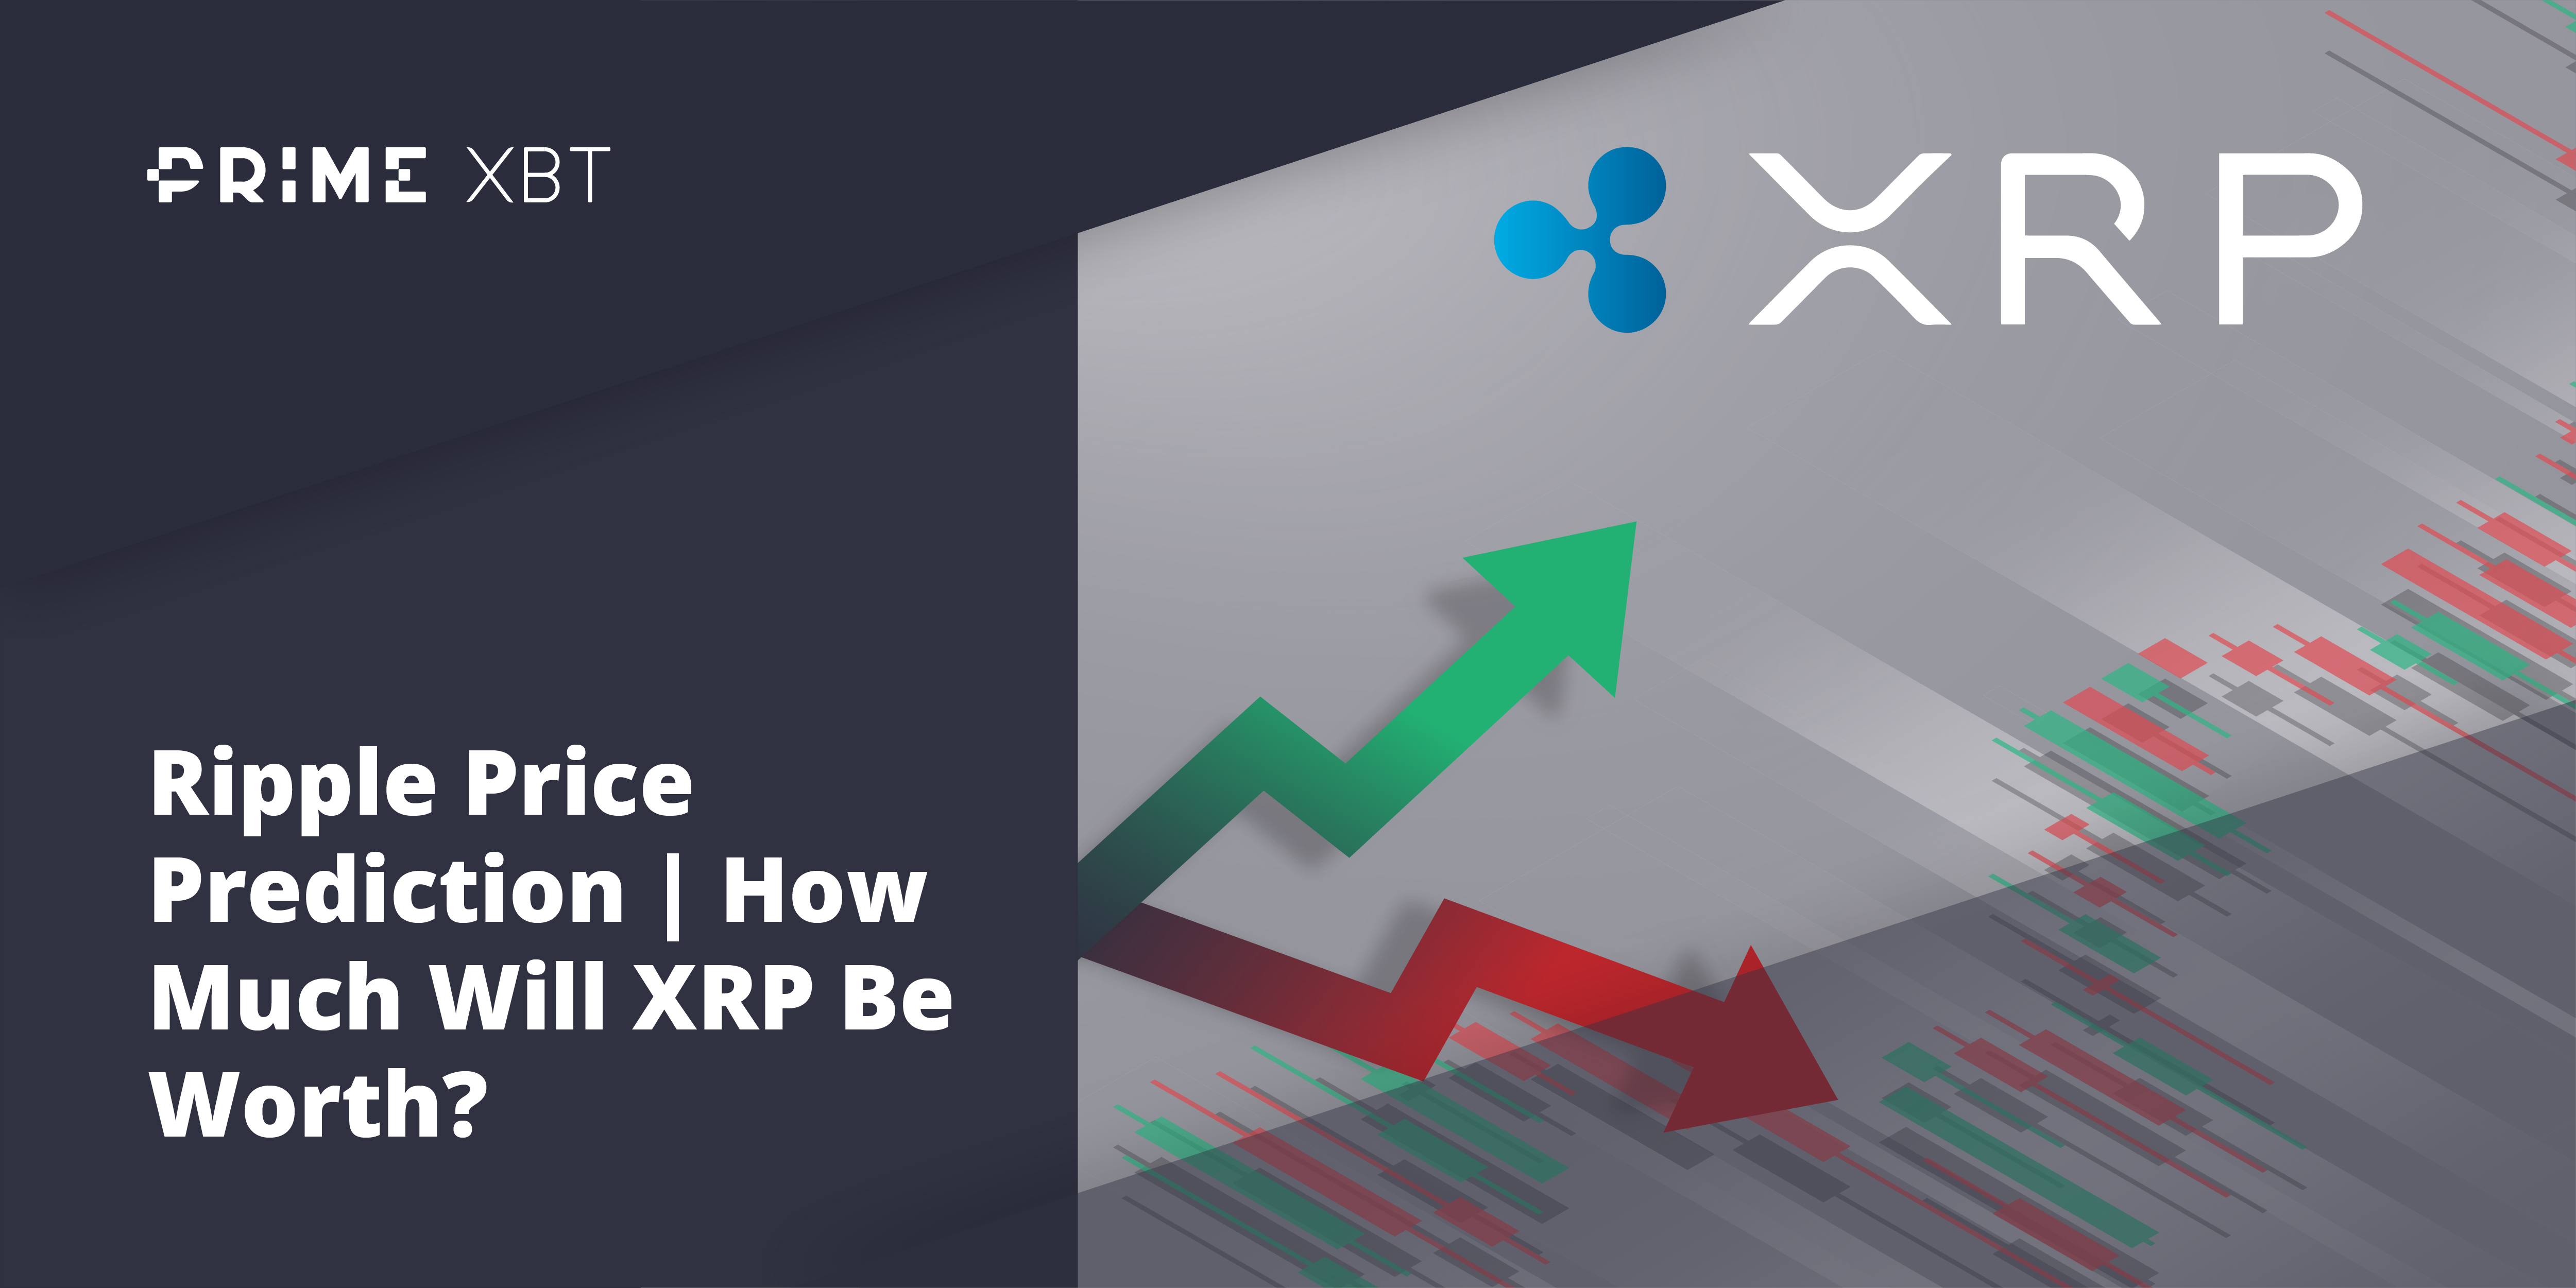 Ripple Price Prediction | How Much Will XRP Be Worth? - xrp 1